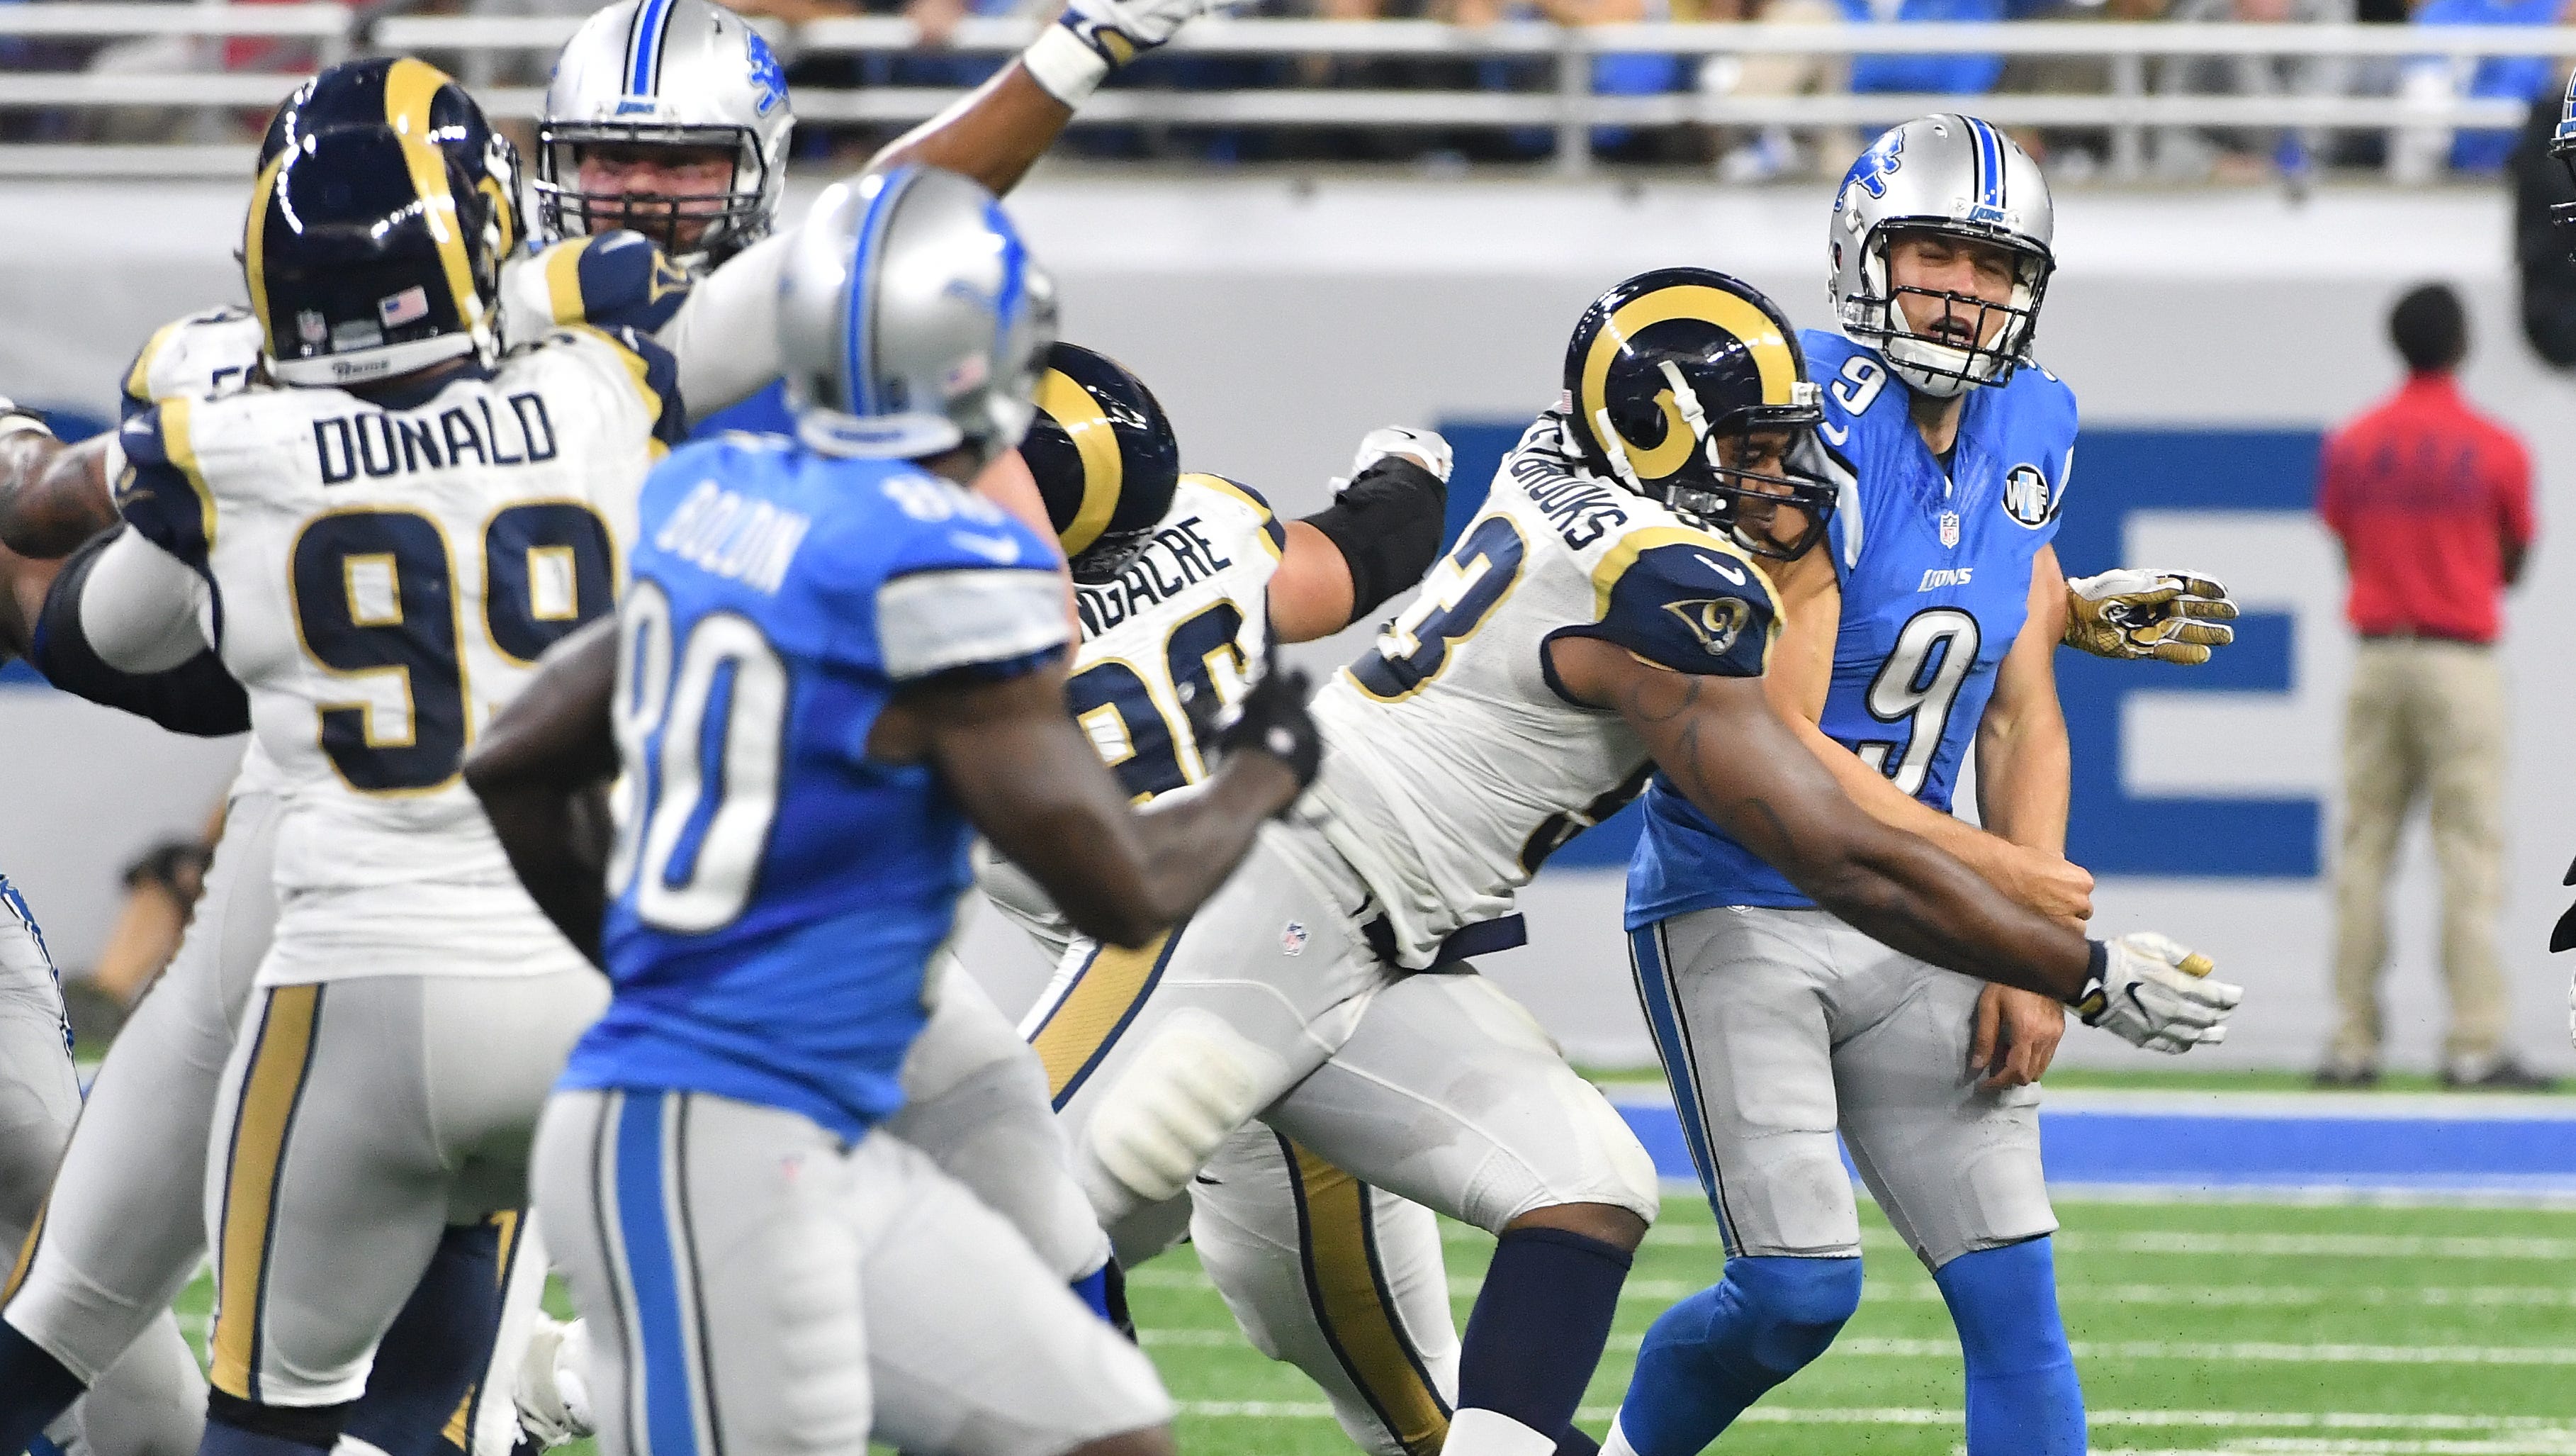 Lions quarterback Matthew Stafford pays the price as he gets slammed by Rams Ethan Westbrooks on his completion to wide receiver Anquan Boldin on Detroit's game winning drive late in the fourth quarter.